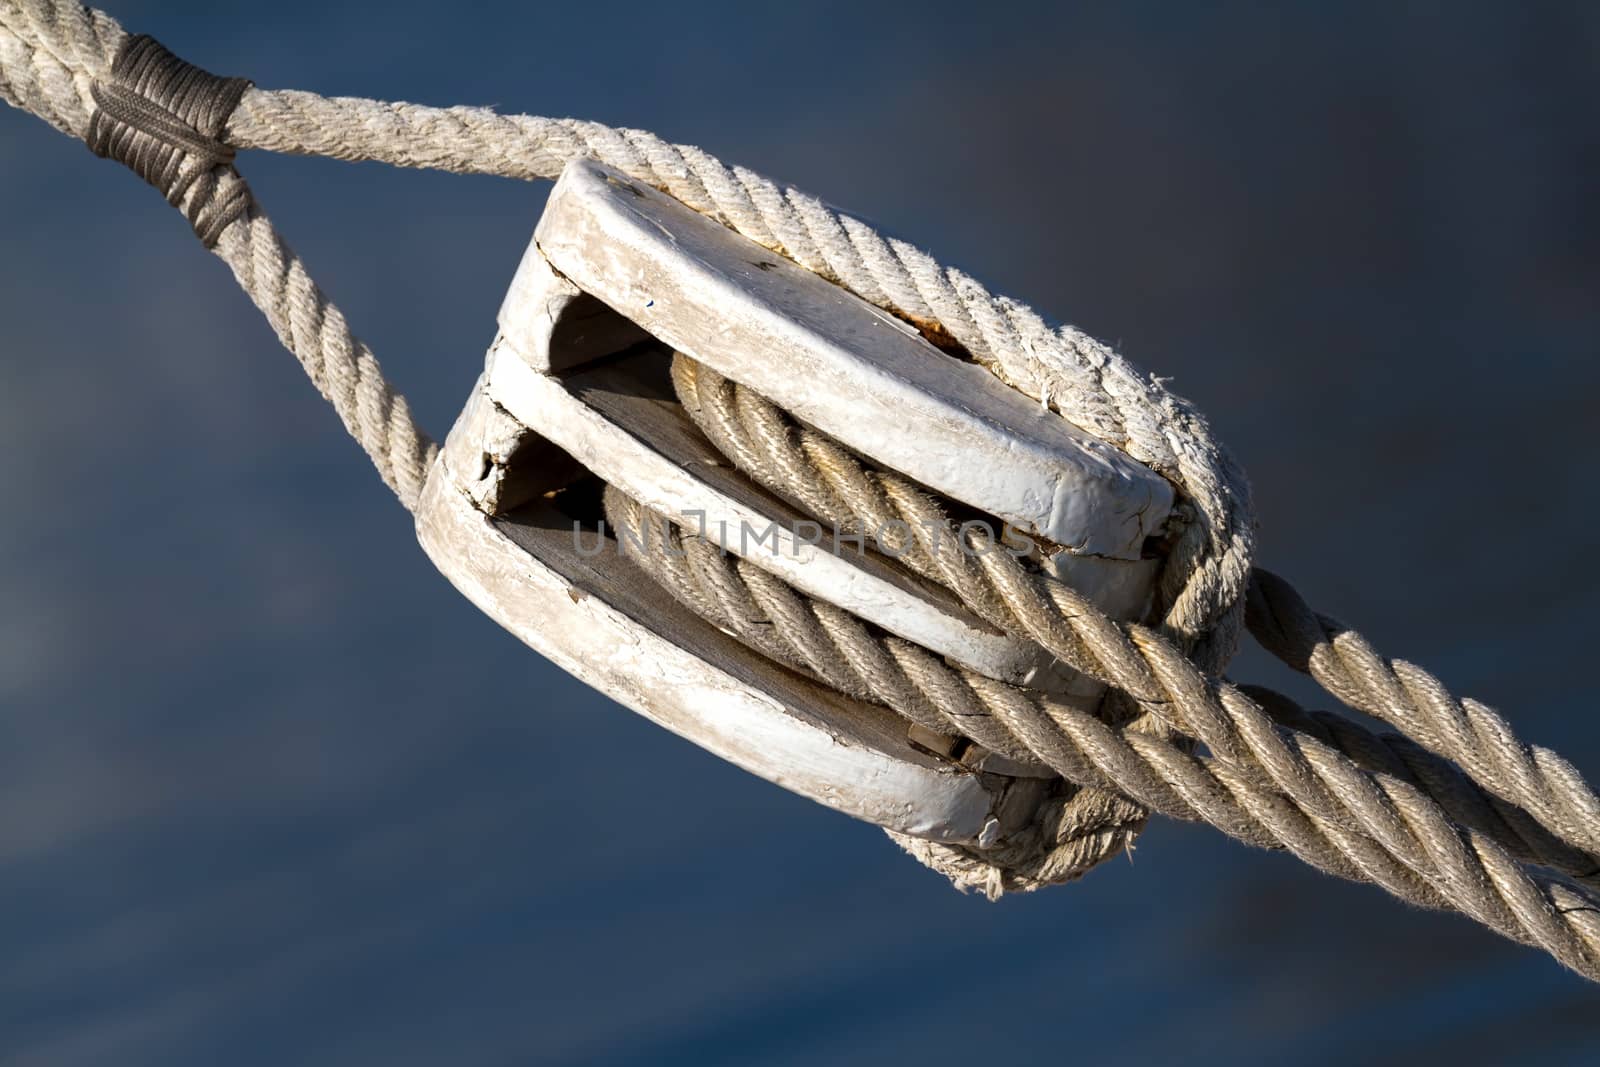 Sailing rope tension with the fishing pulley by Digoarpi